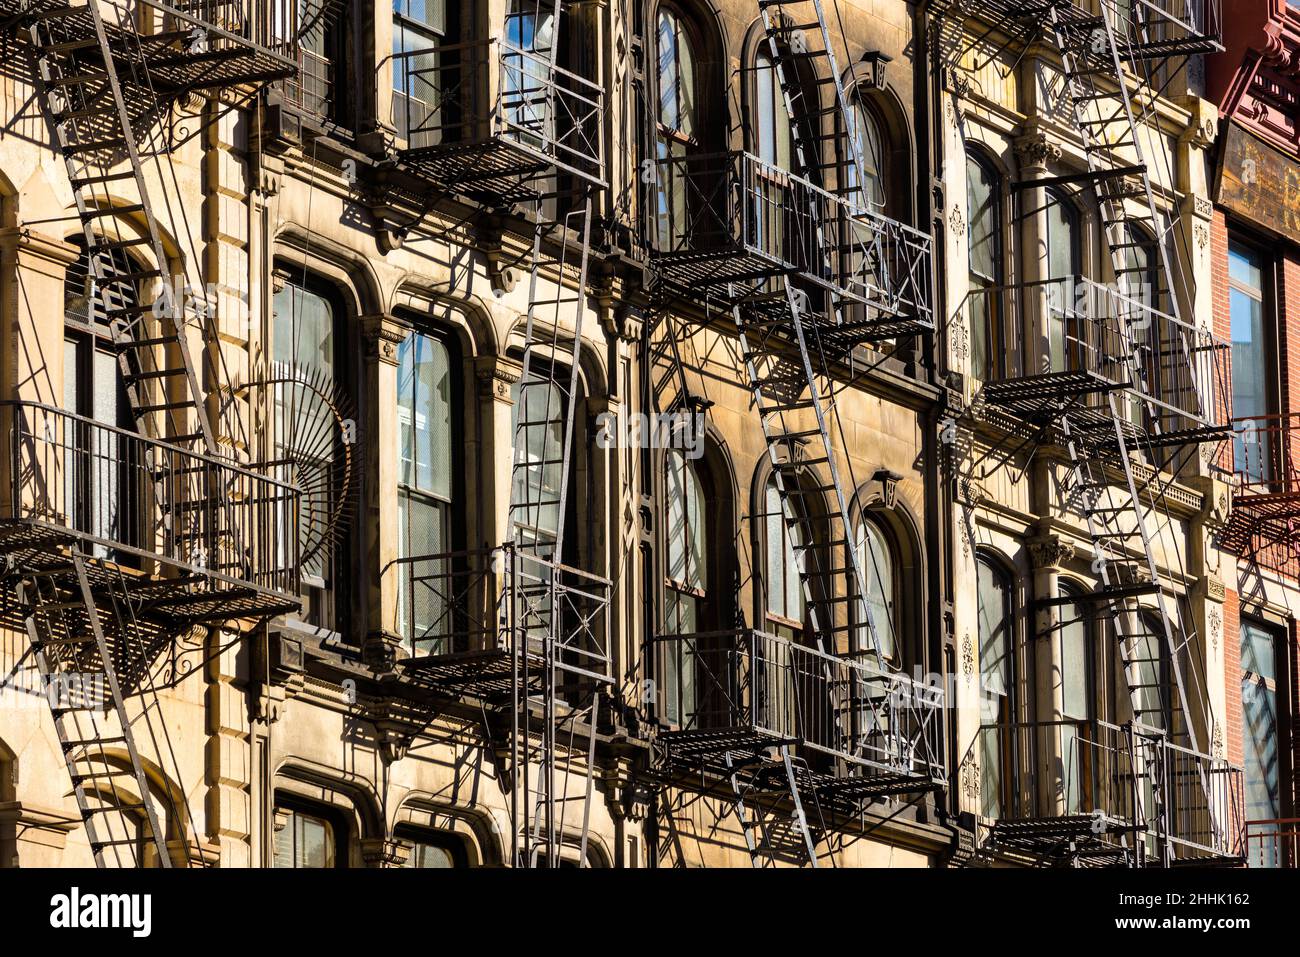 Typical Soho loft building facades with fire escapes. Manhattan, New York City Stock Photo